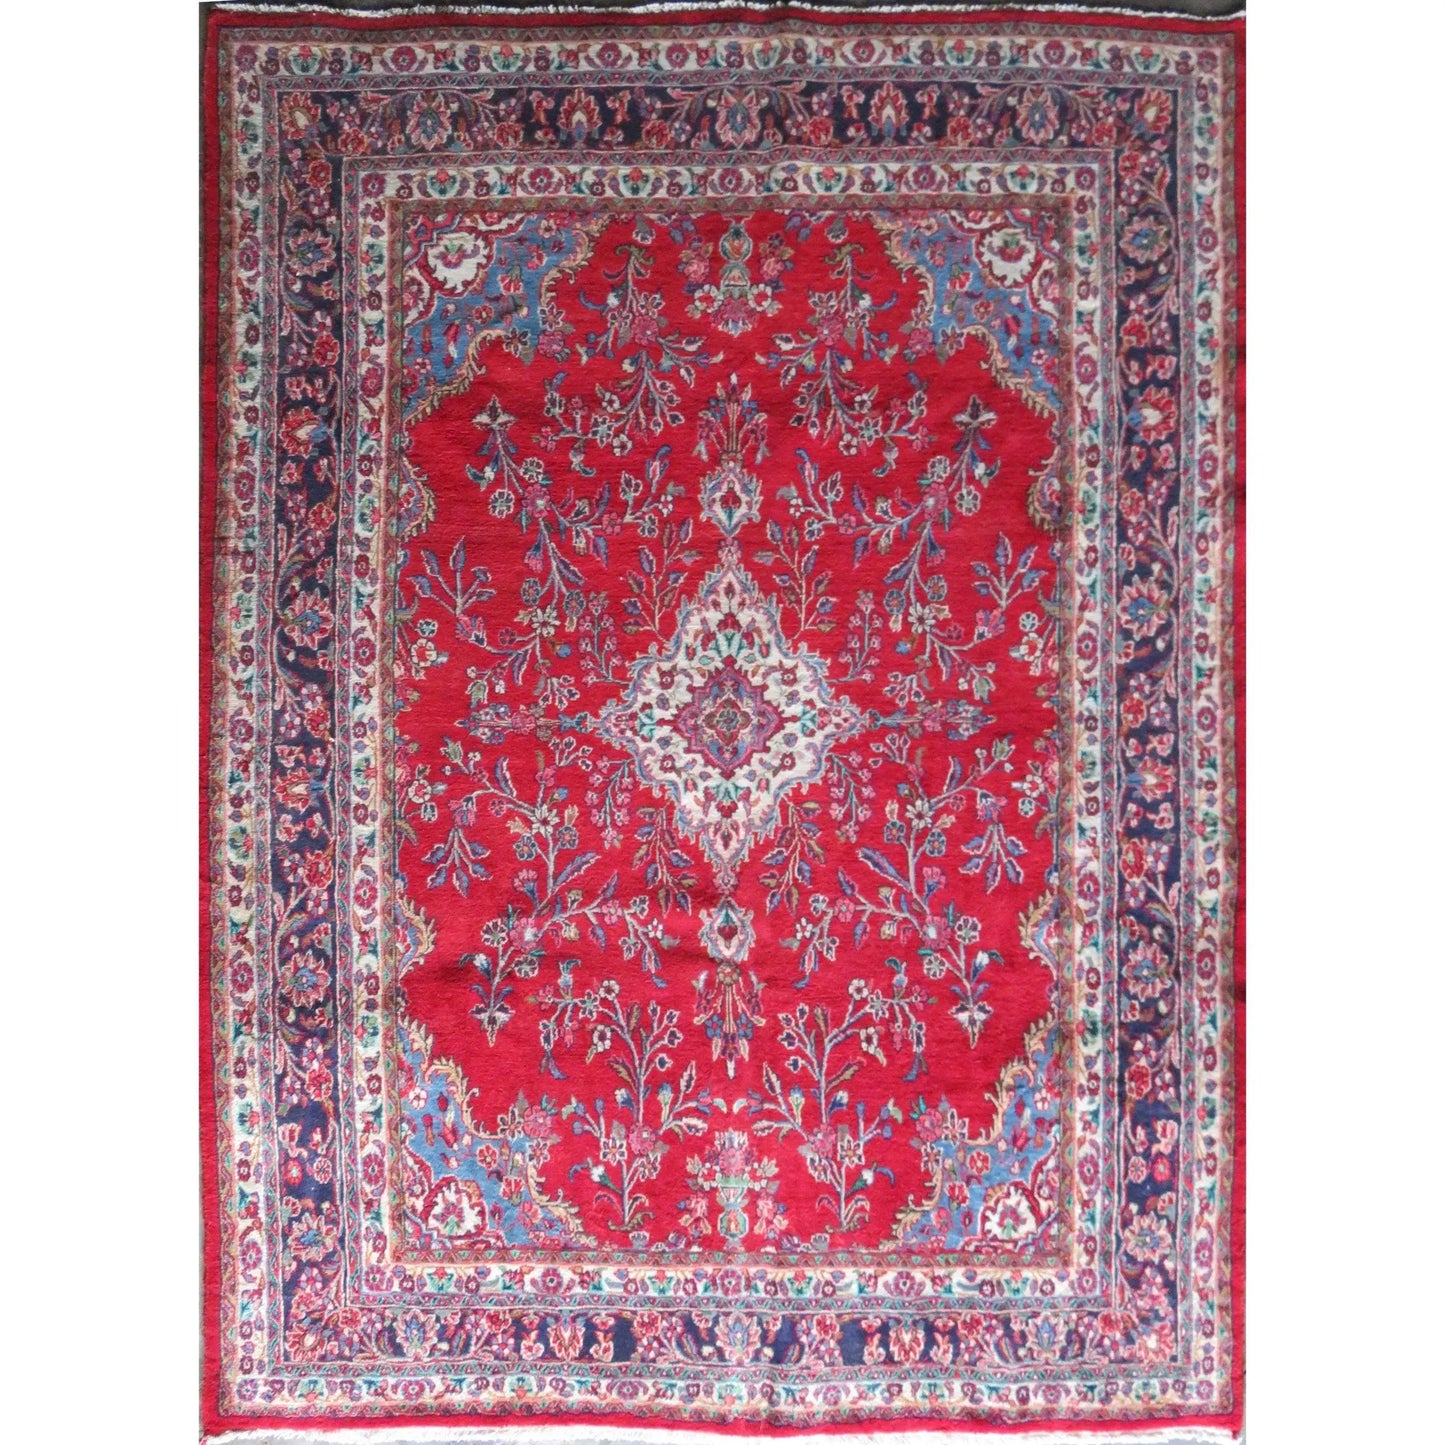 Hand-Knotted Persian Wool Rug _ Luxurious Vintage Design, 12'9" x 9'8", Artisan Crafted